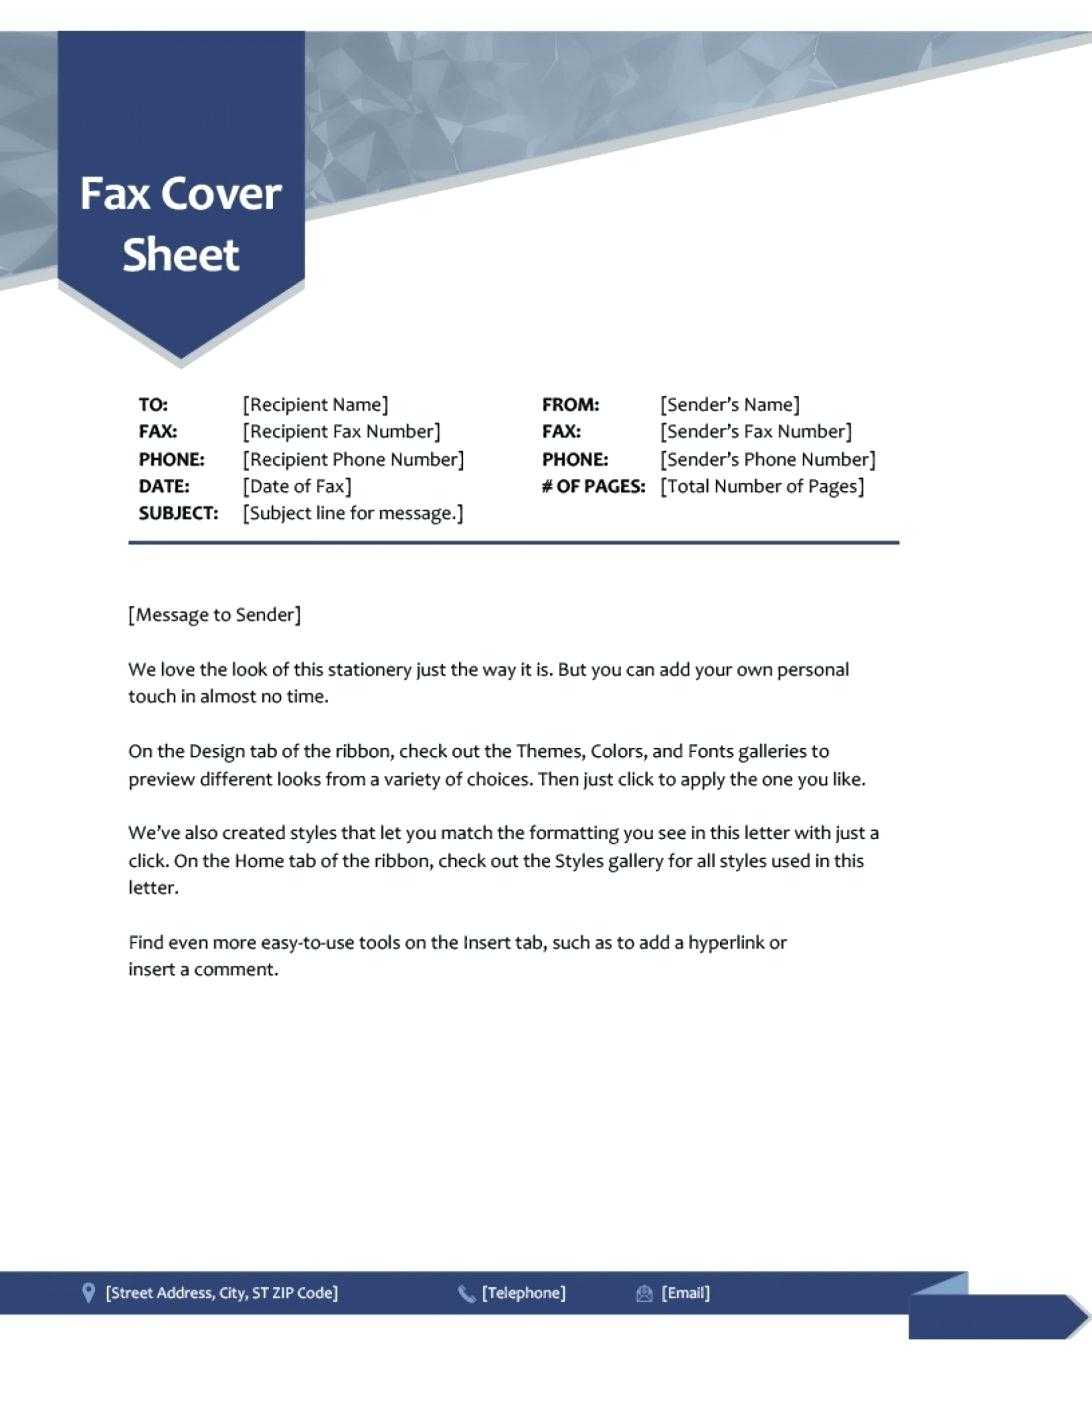 Resume Free Cover Letter Samples In Word Extraordinary Within Fax Template Word 2010